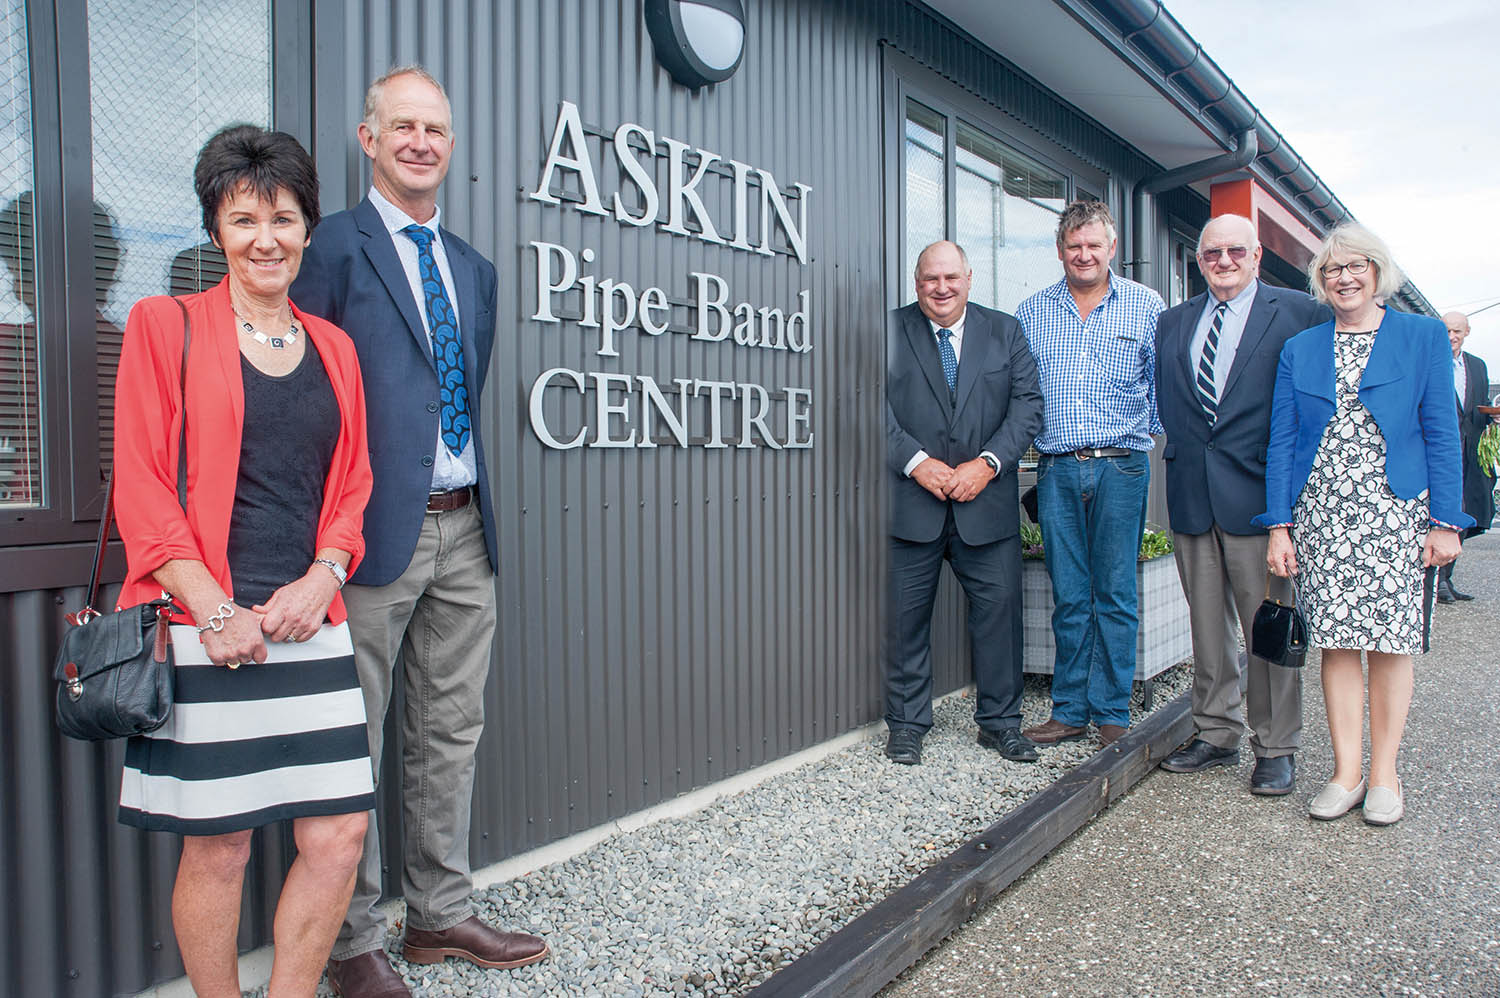 St Andrew's College Askin Pipe Band Centre.